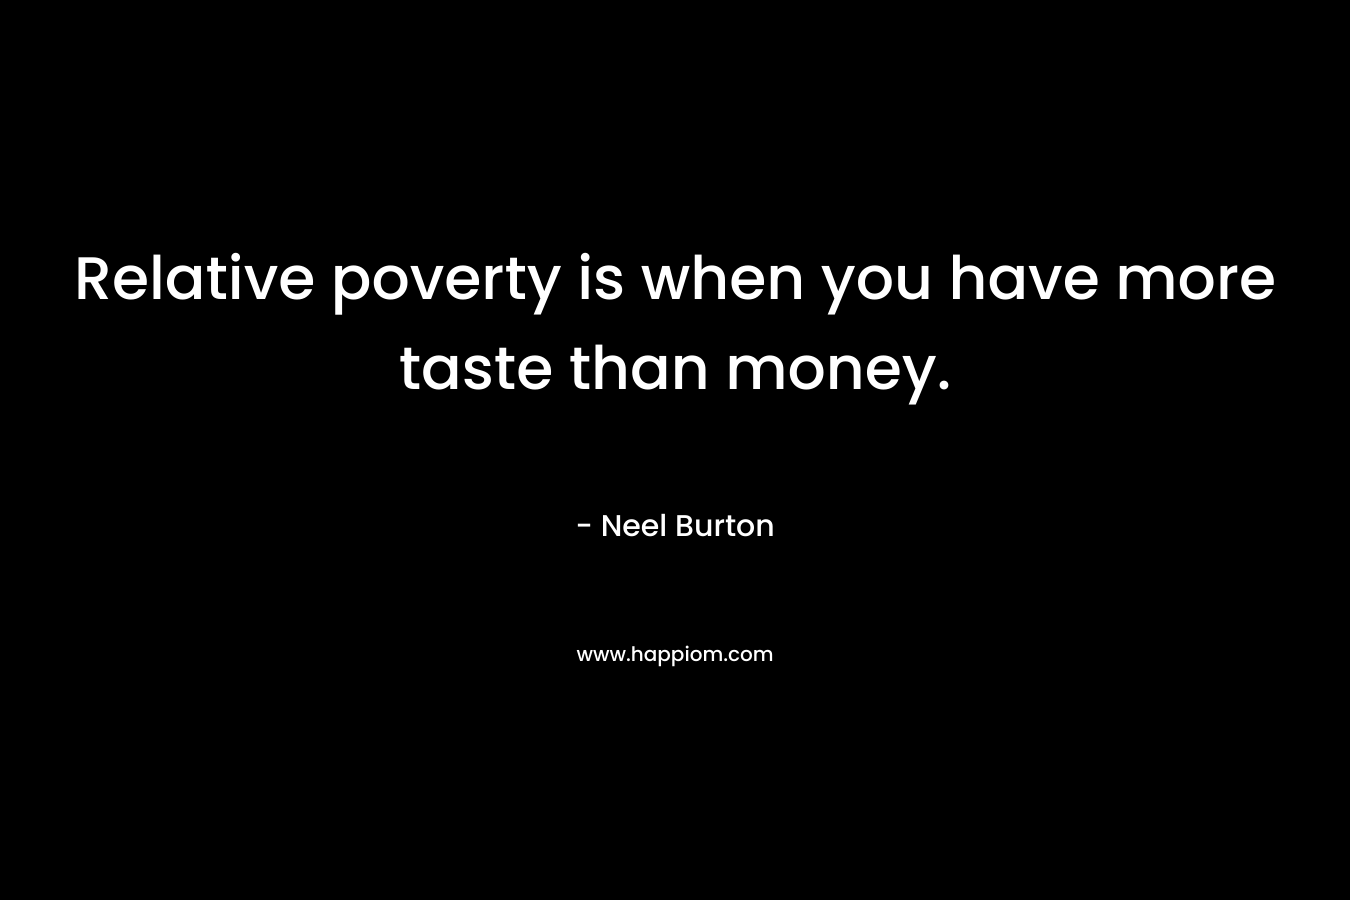 Relative poverty is when you have more taste than money. – Neel Burton